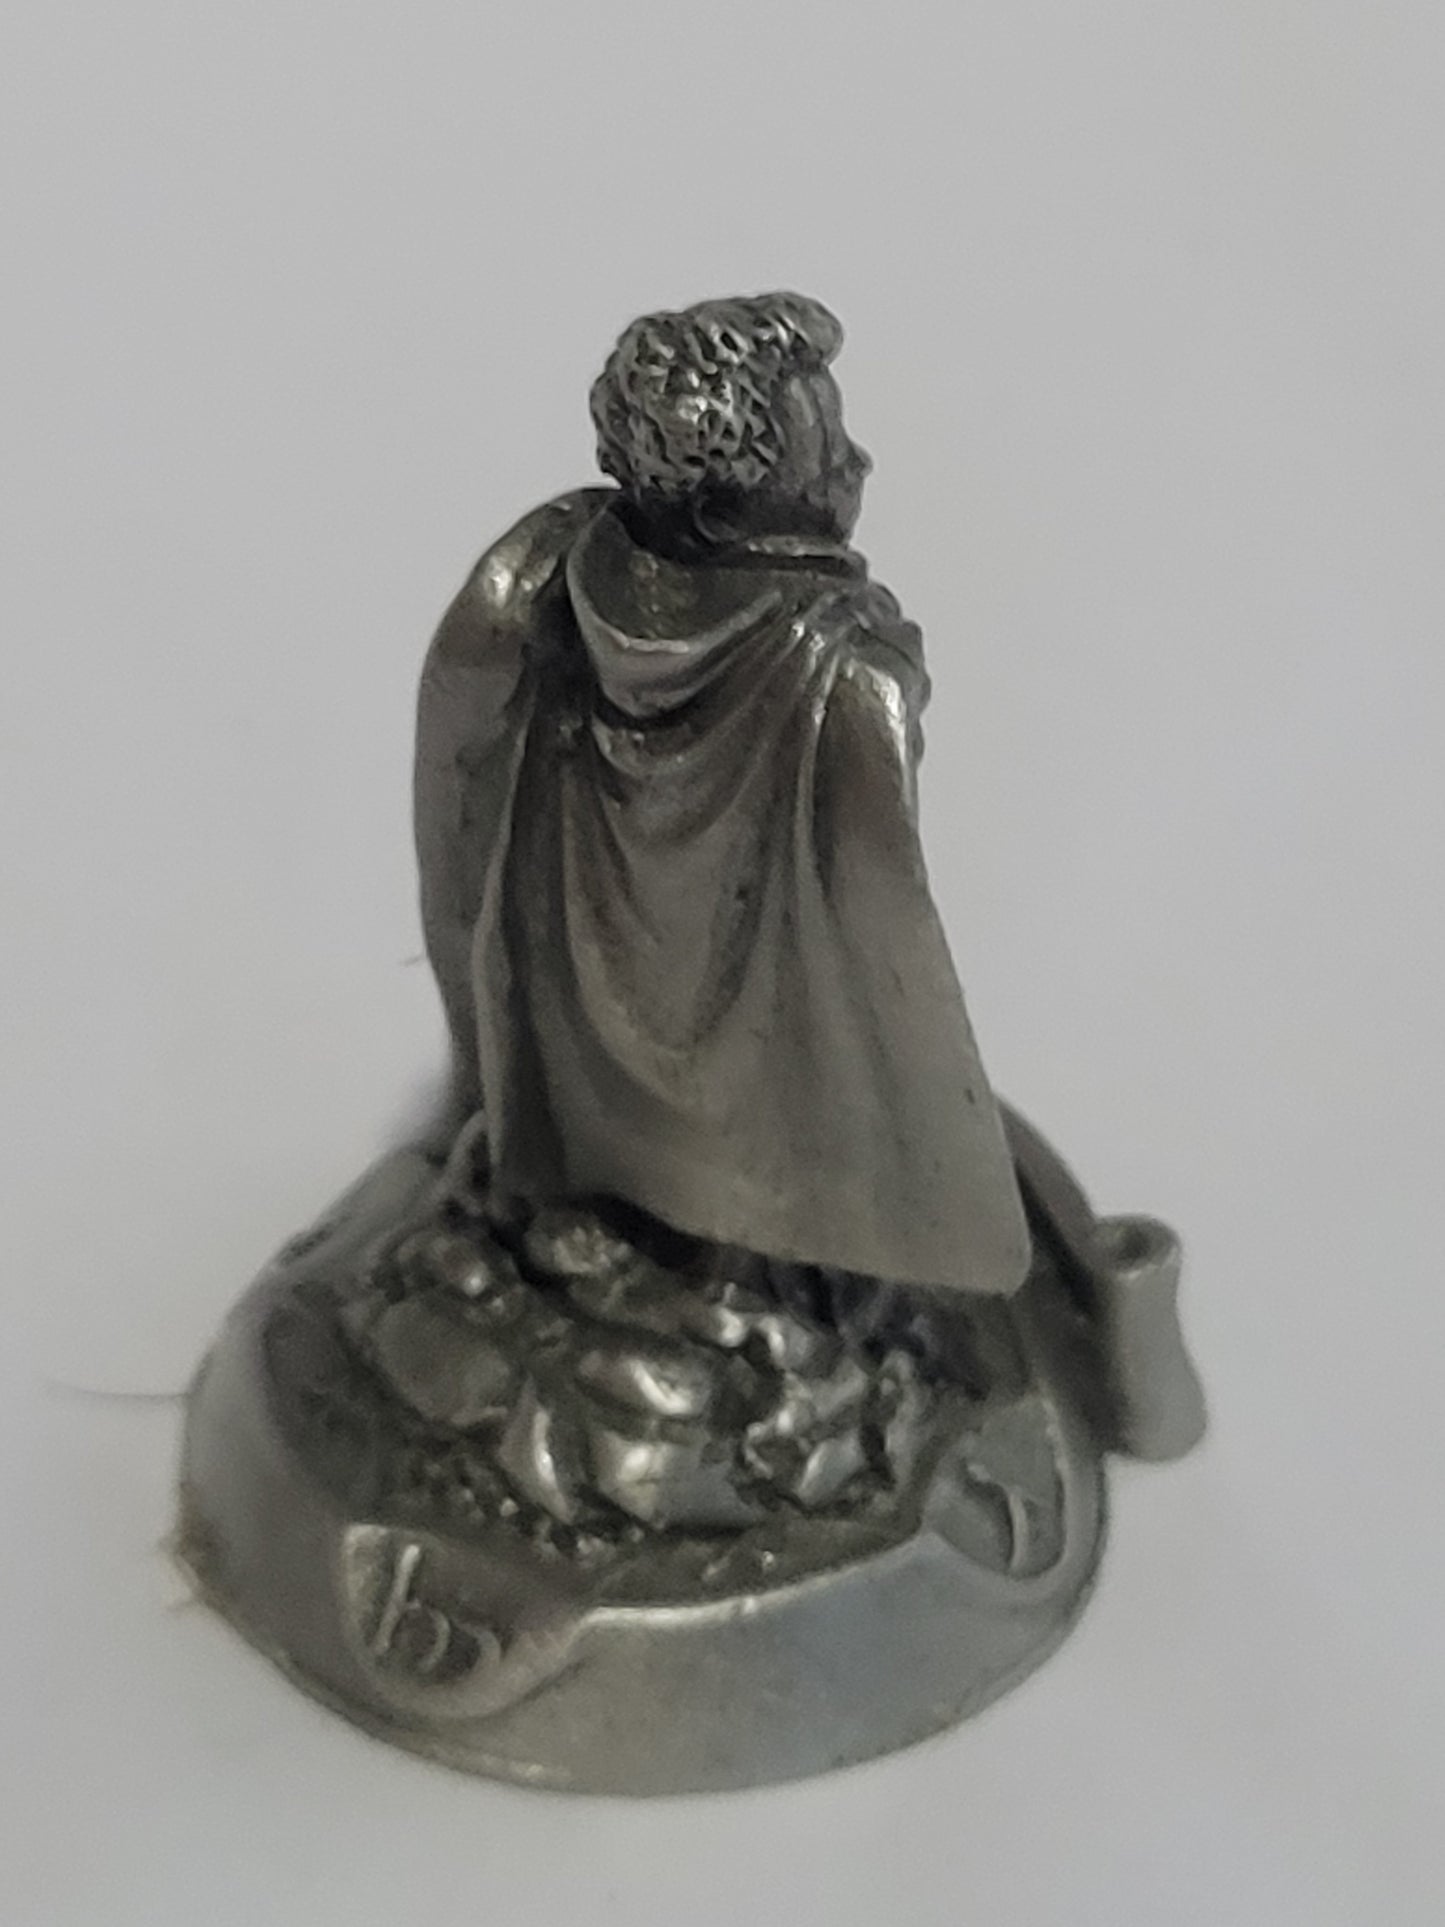 Merry from the Lord of the Rings by Rawcliffe, Pewter Figurine